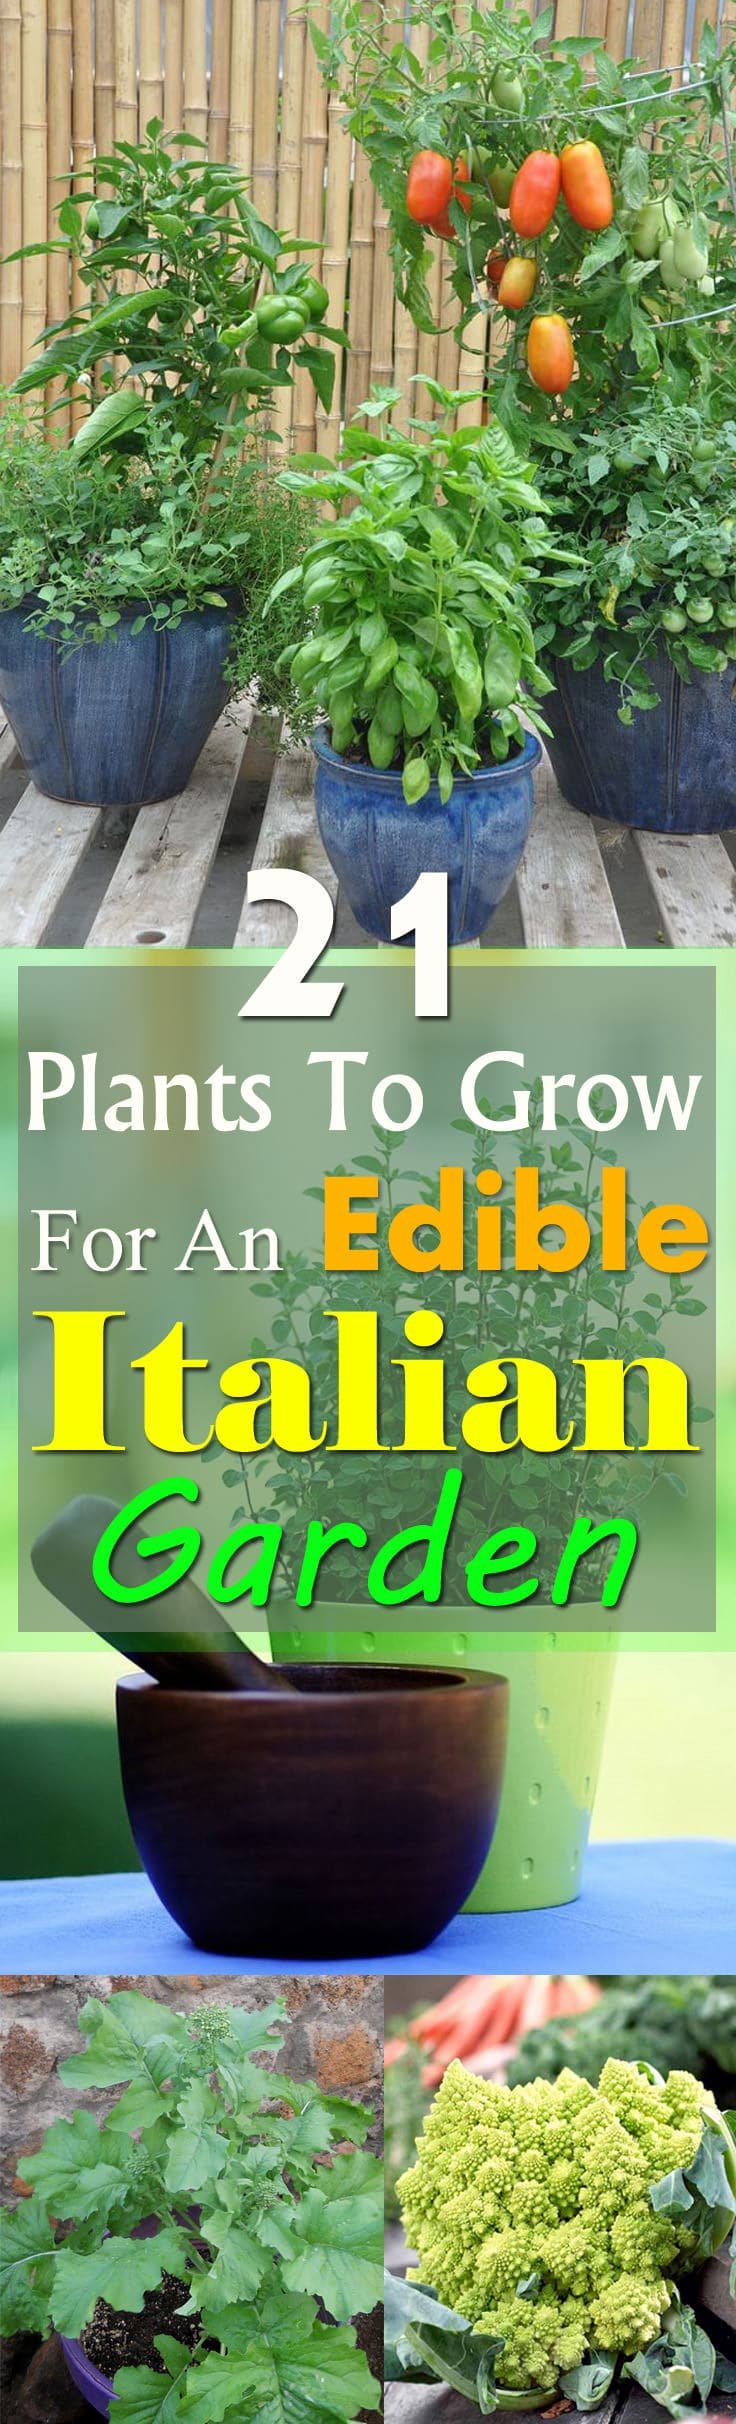 If you love Italian food, grow an Edible Italian Garden to have a fresh supply of tastiest vegetables and herbs. Even if you're short of space, you can grow them in containers!